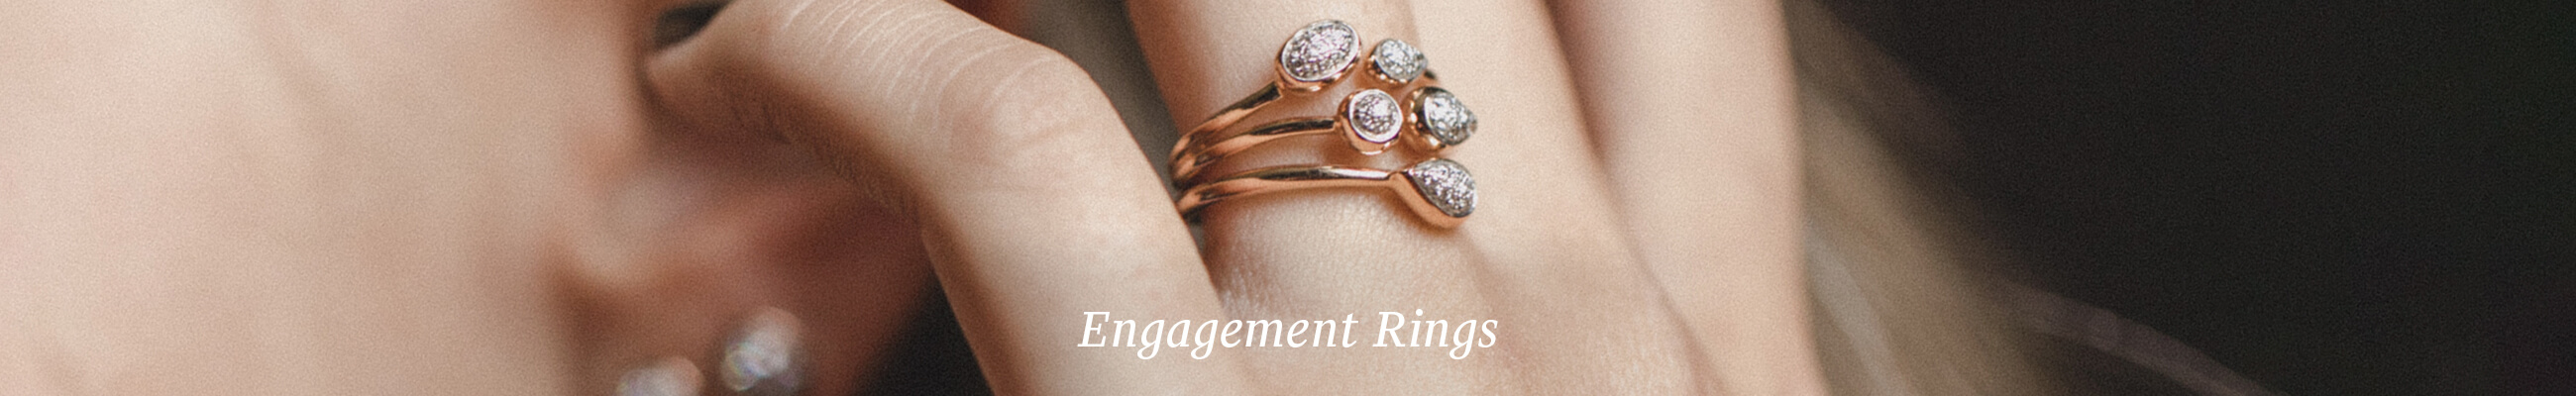 17d751d8-cb15-4a83-b90b-8298621954f4Collection_Banner_Product_EngagementRings.jpg